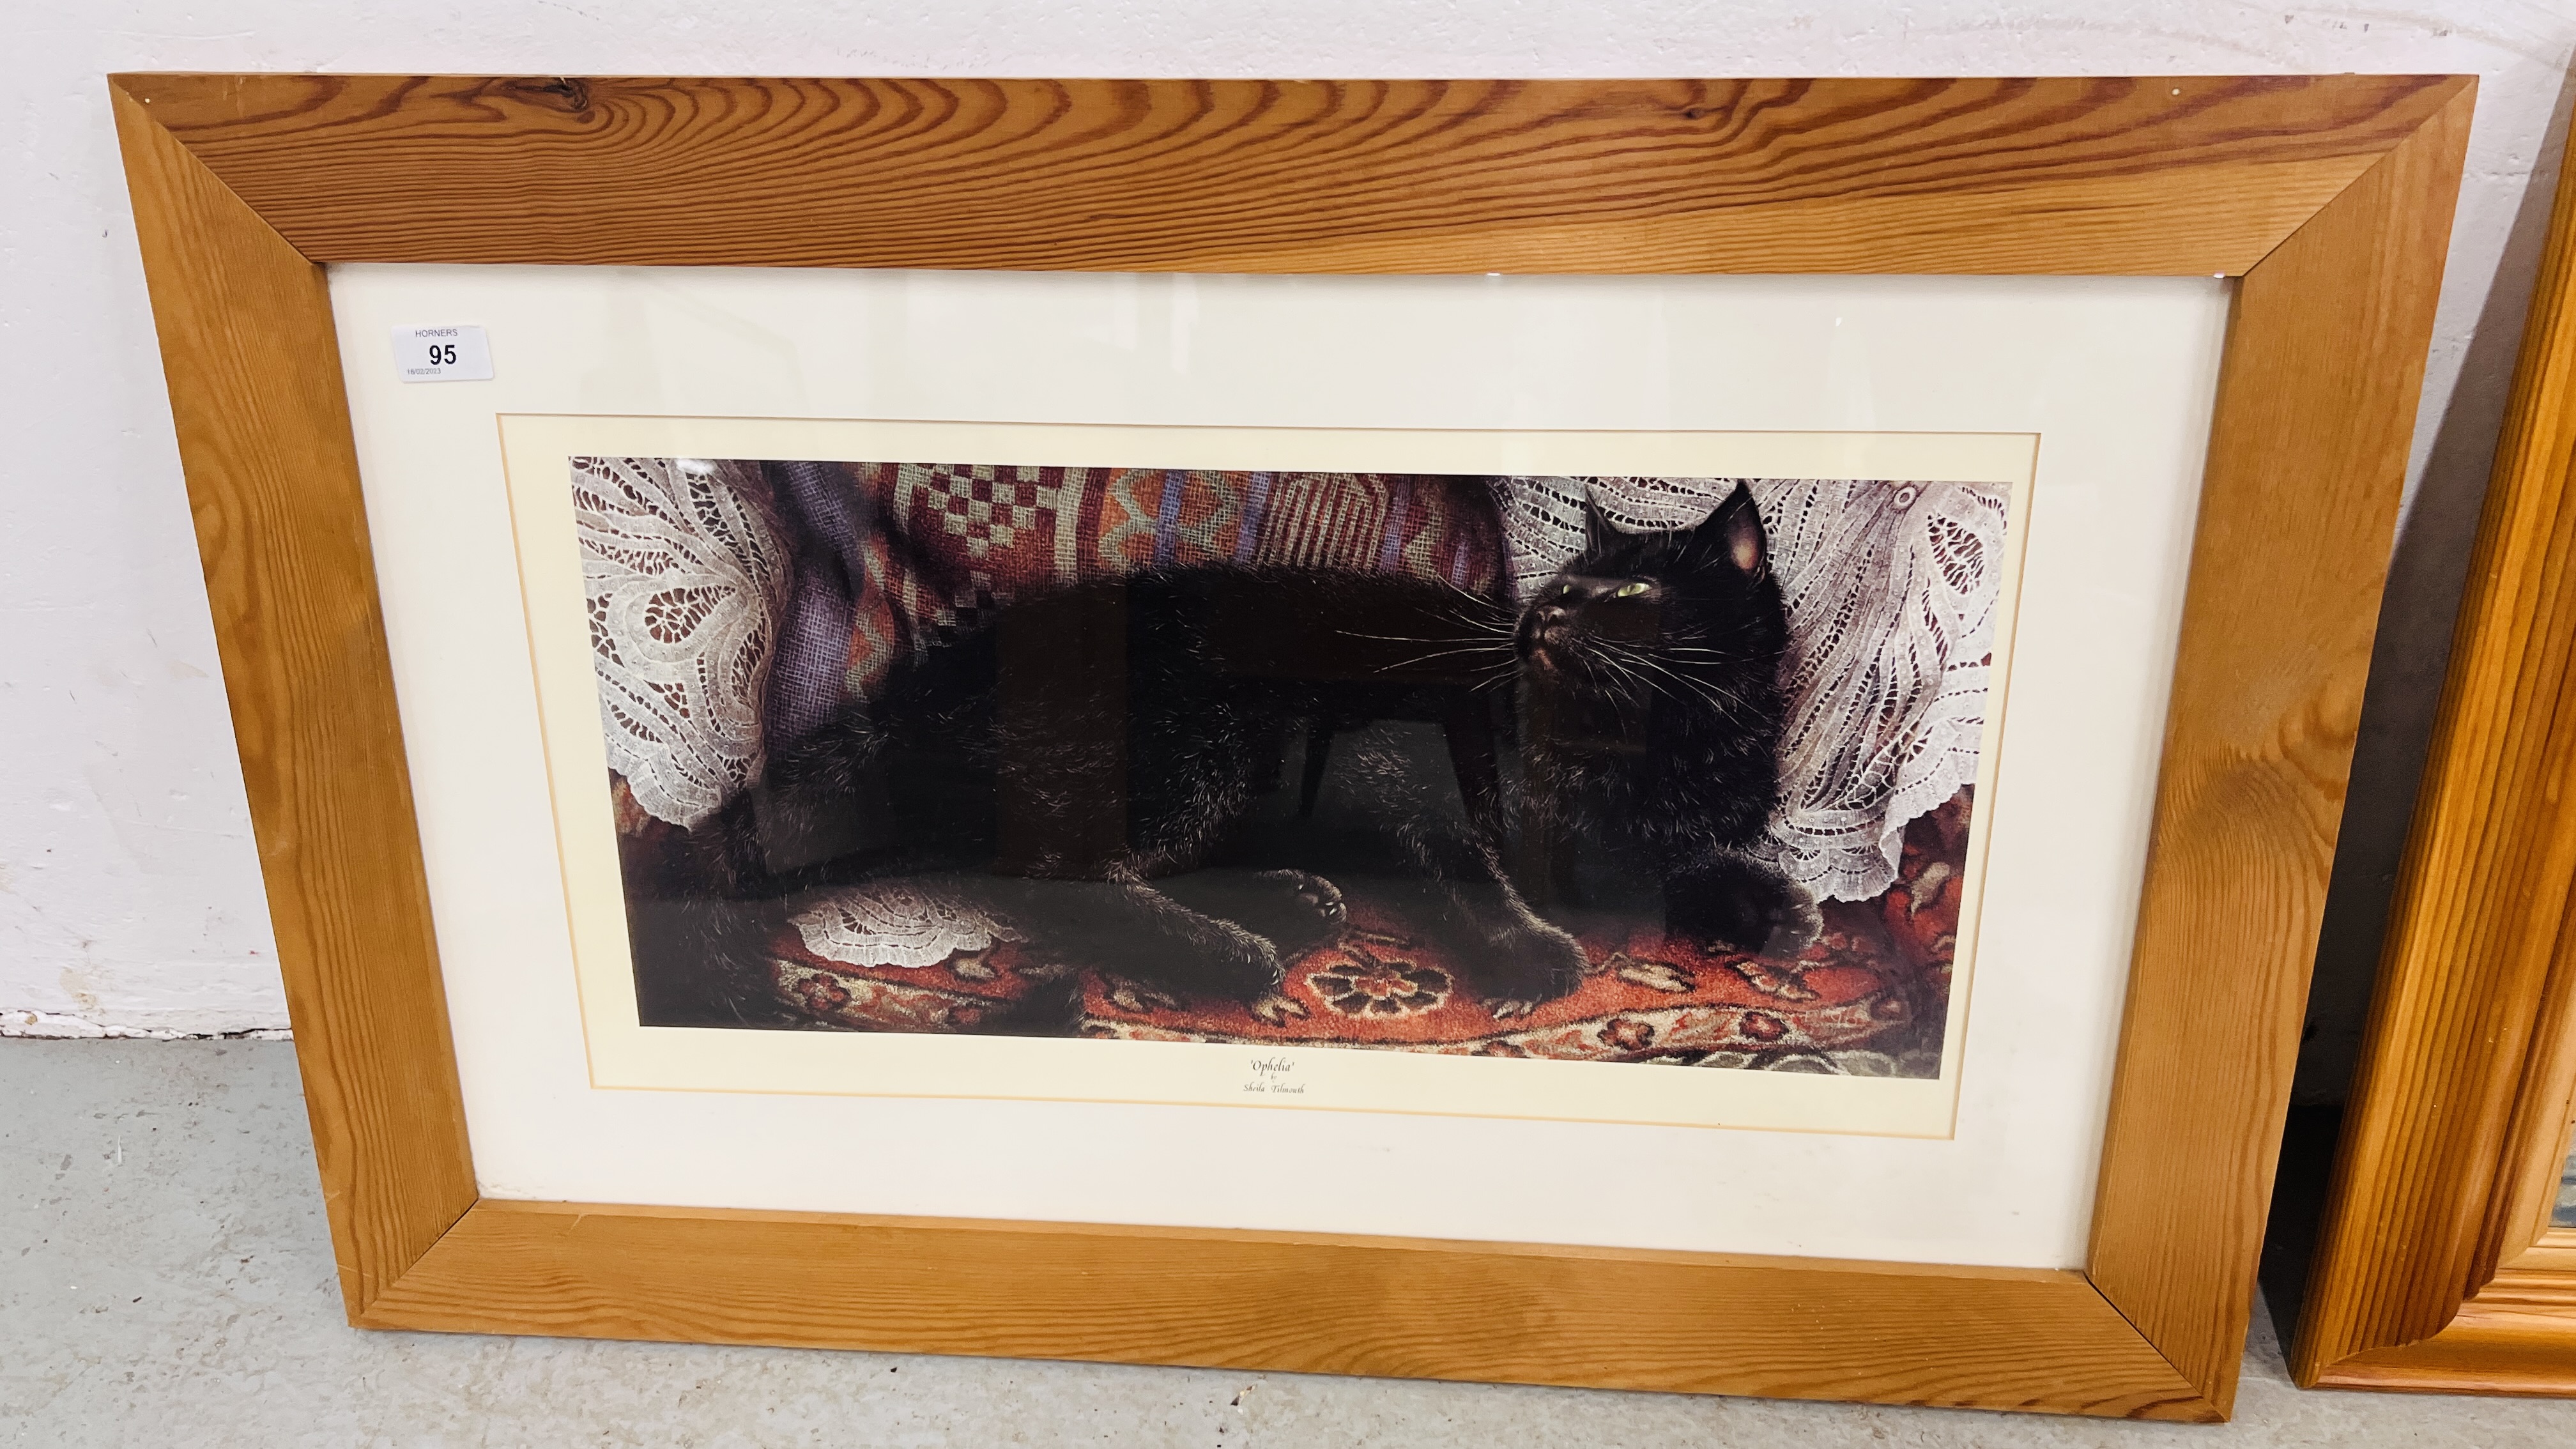 A PINE FRAMED SHEILA TILMOUTH PRINT "OPHELIA" 30 X 59CM ALONG WITH A PINE WALL MIRROR WITH INSET - Image 4 of 6